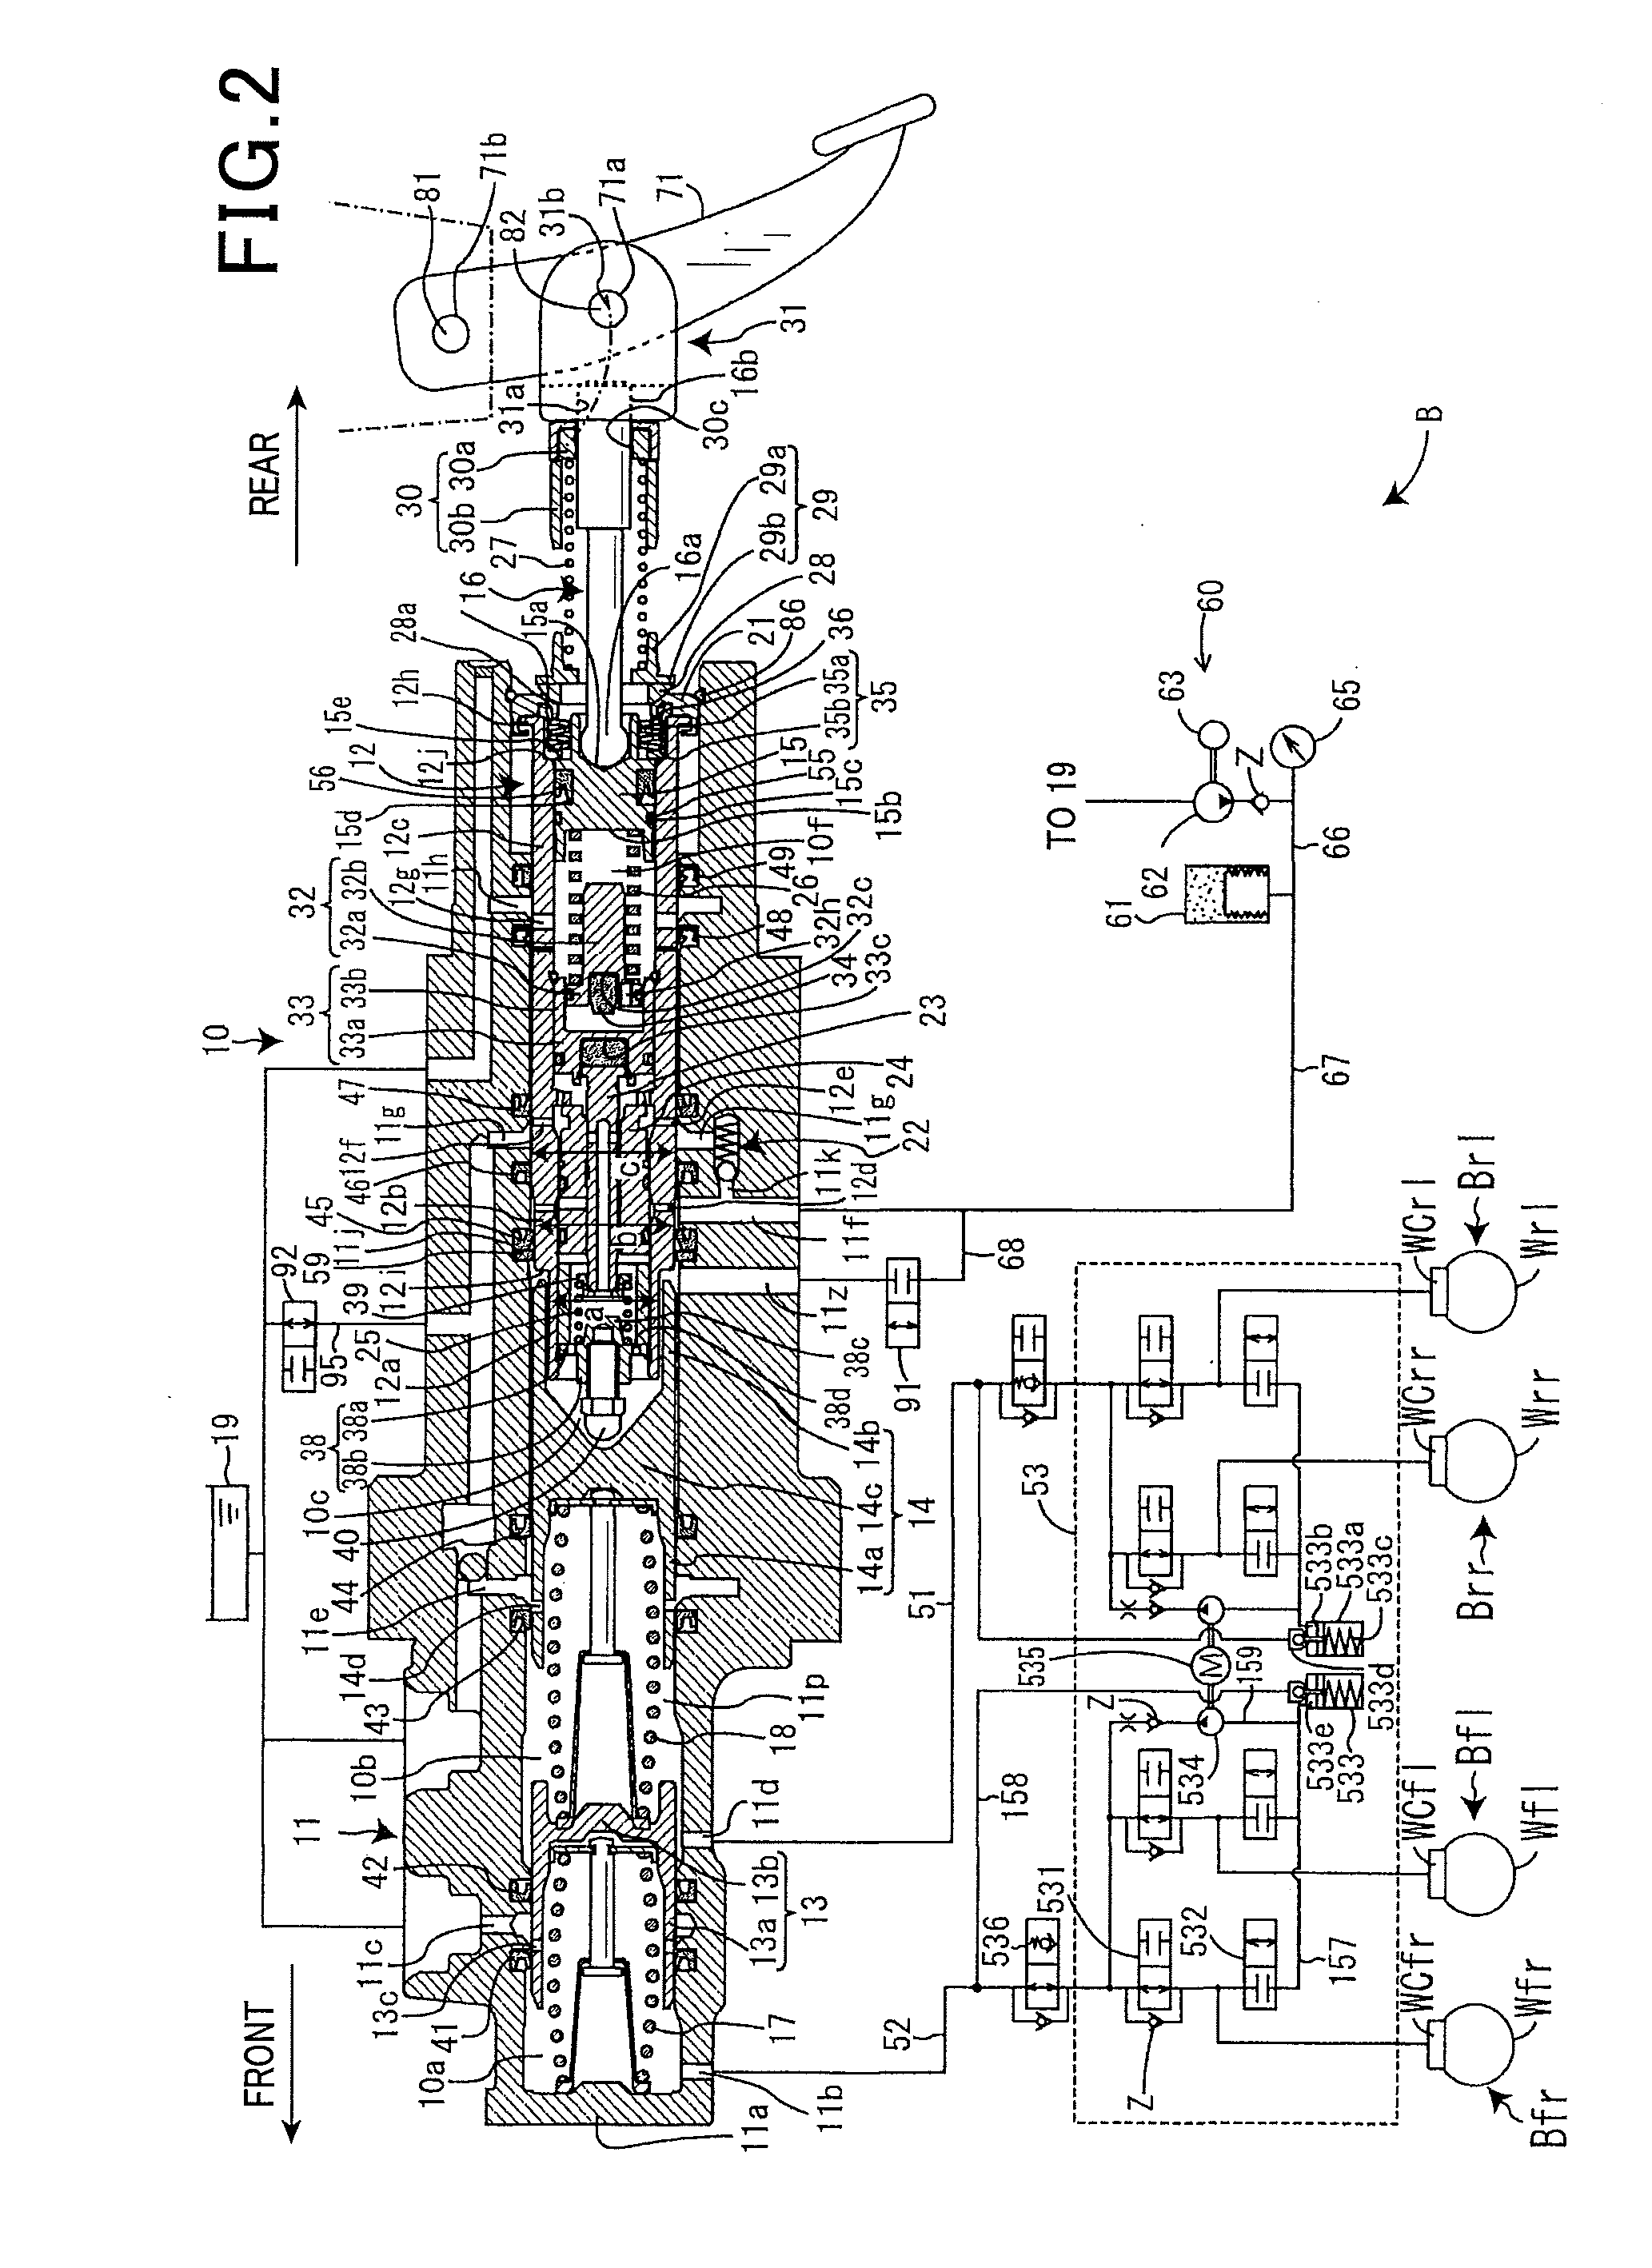 Brake system for vehicle with collision avoidance mechanism